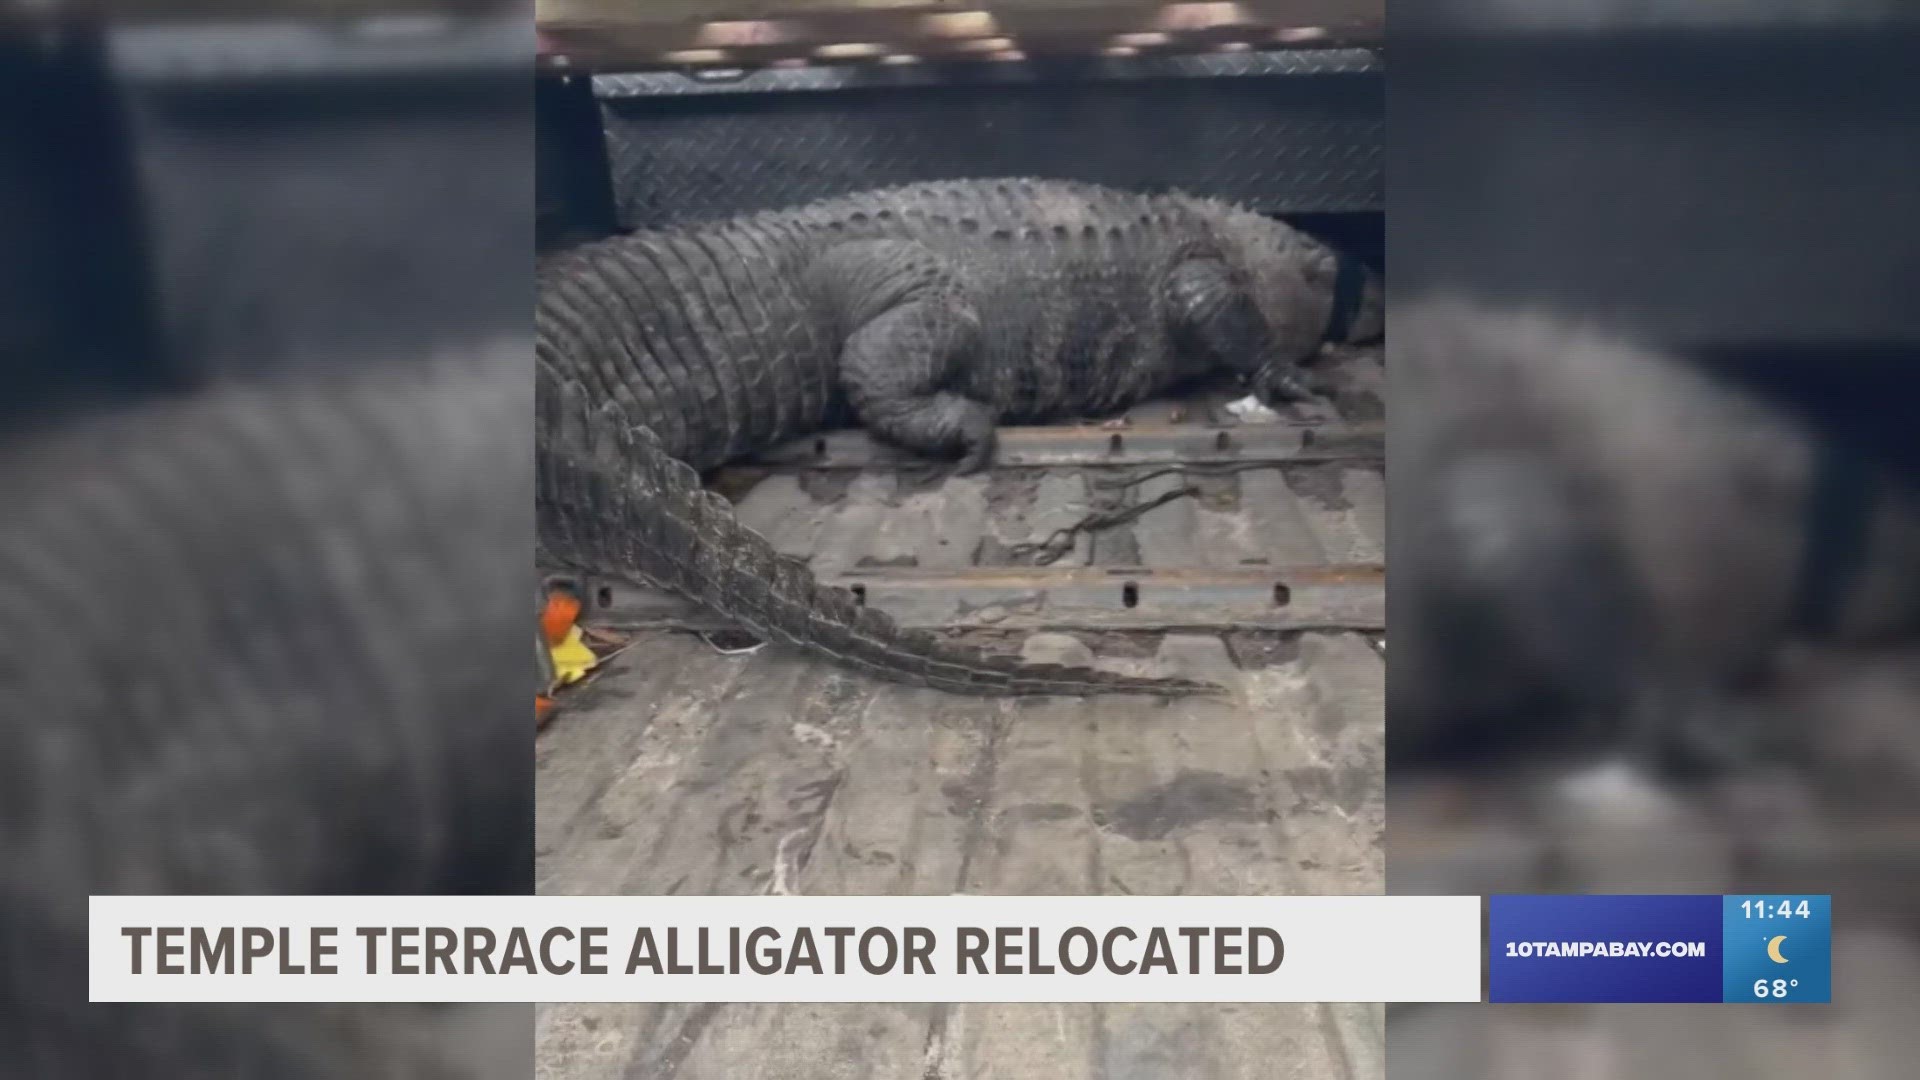 The nine-foot, 450-pound gator was living in a retention pond when neighbors began to worry he might escape through a hole in the surrounding fence.